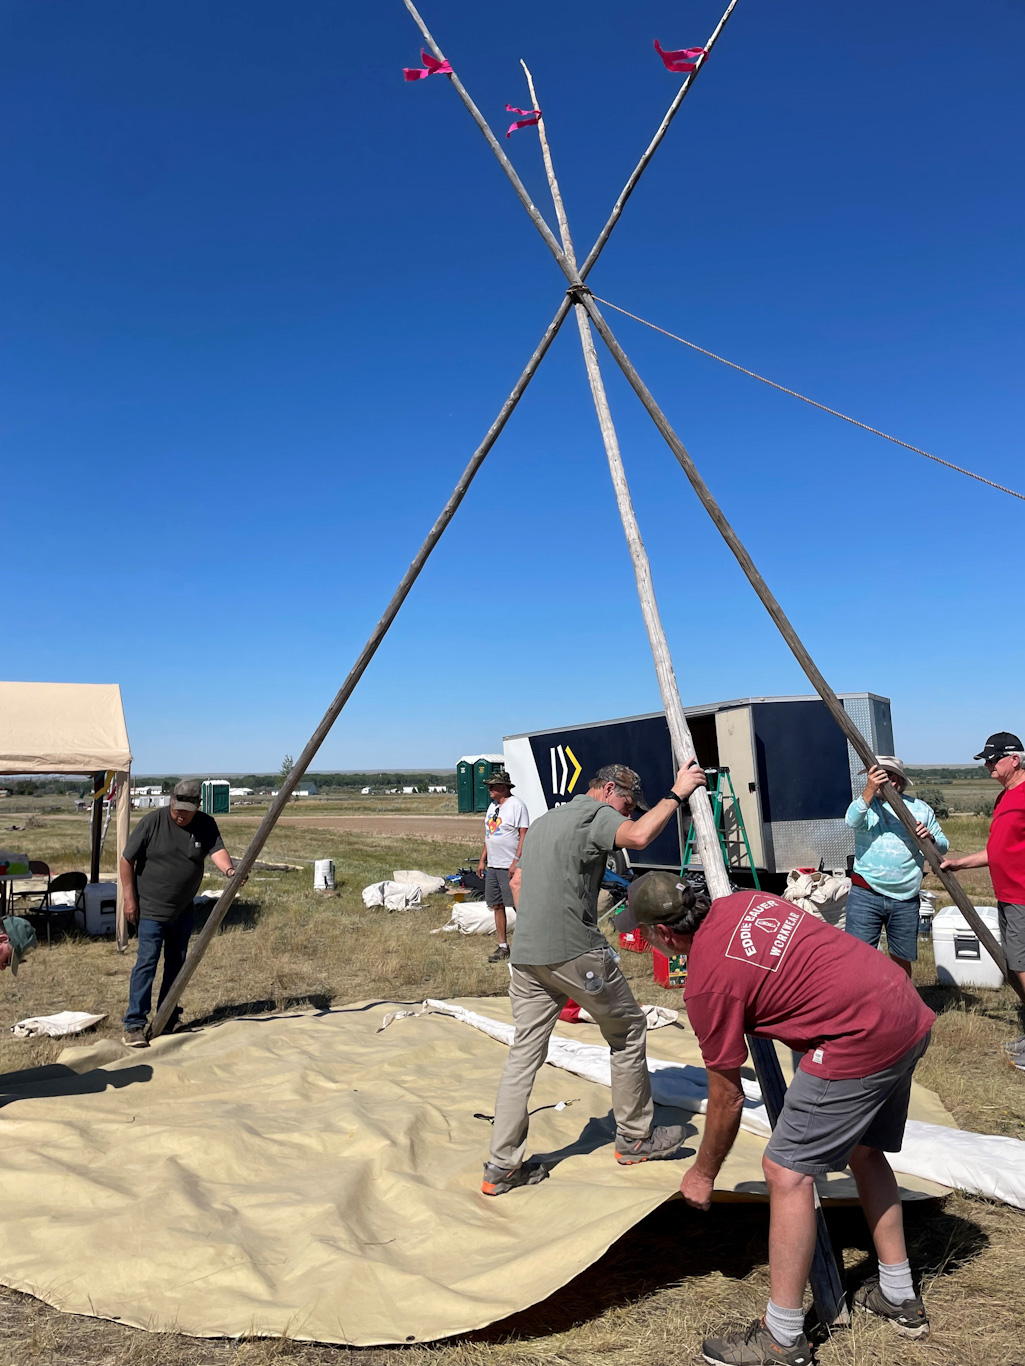  Mission team builds teepees for their stay